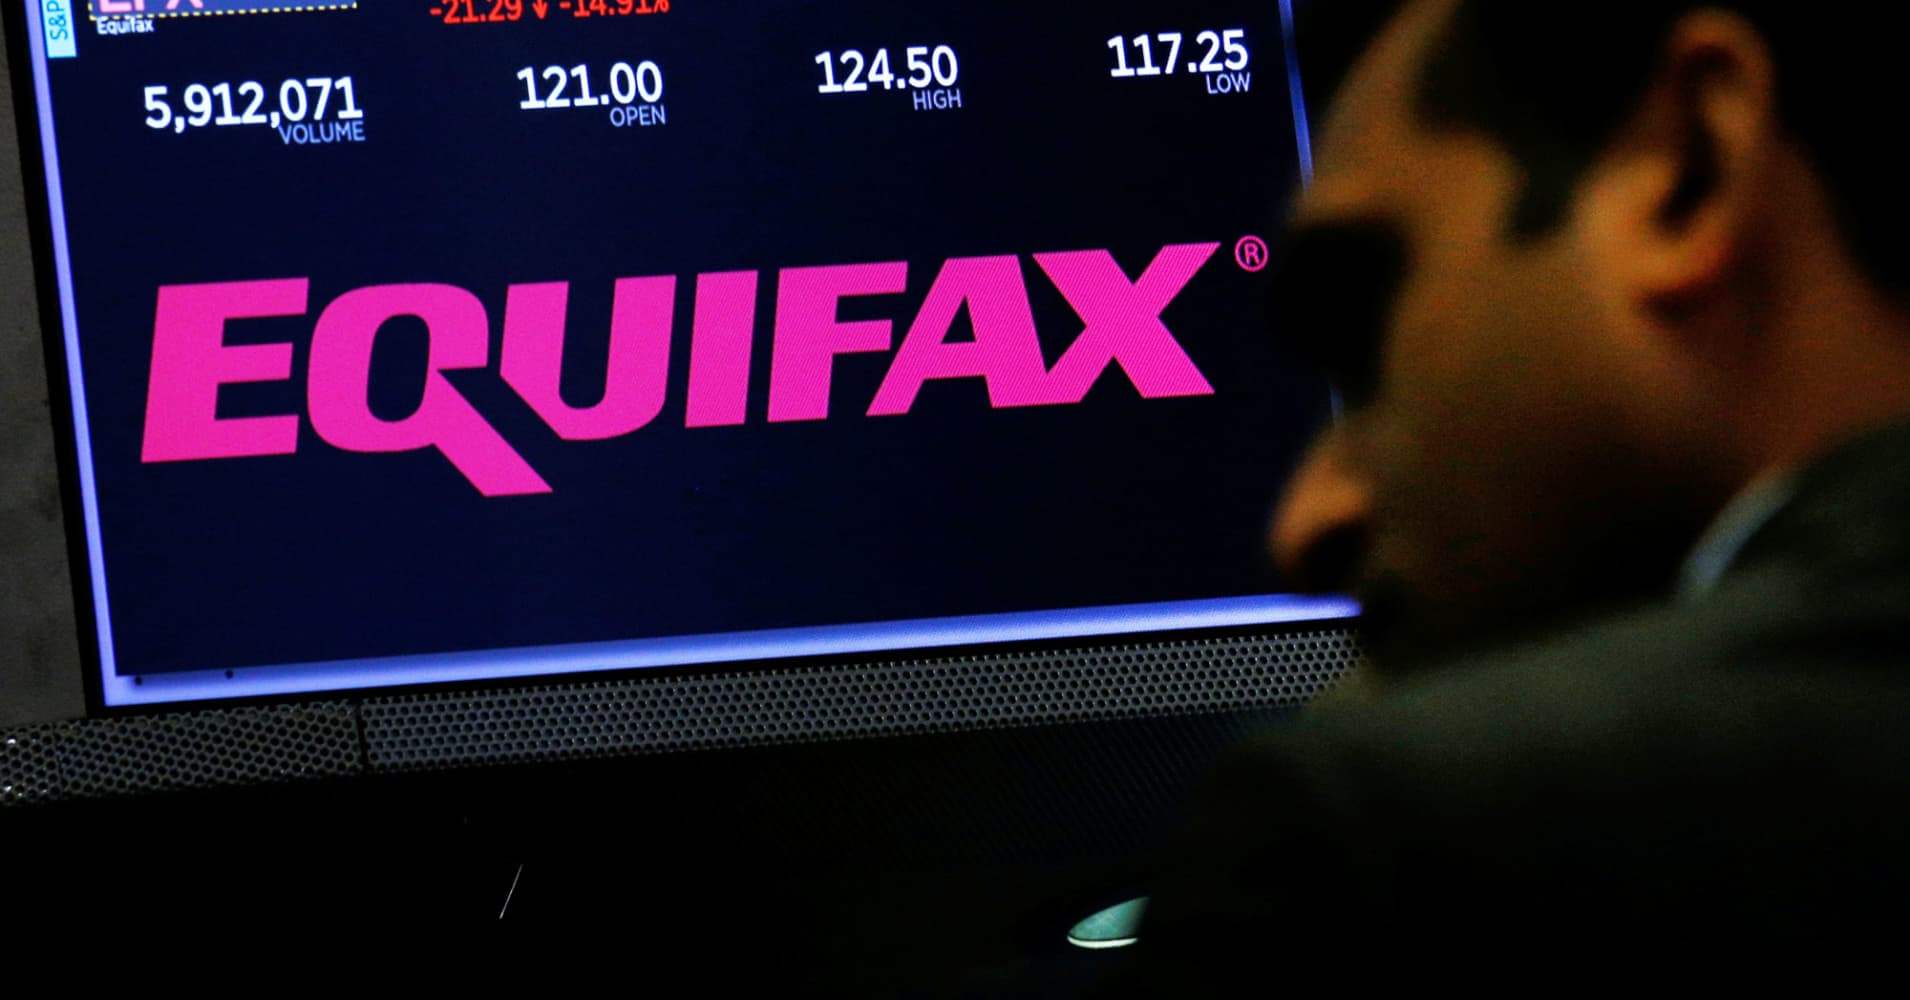 https://www.cnbc.com/2017/10/12/equifax-says-it-might-have-been-breached-again.html